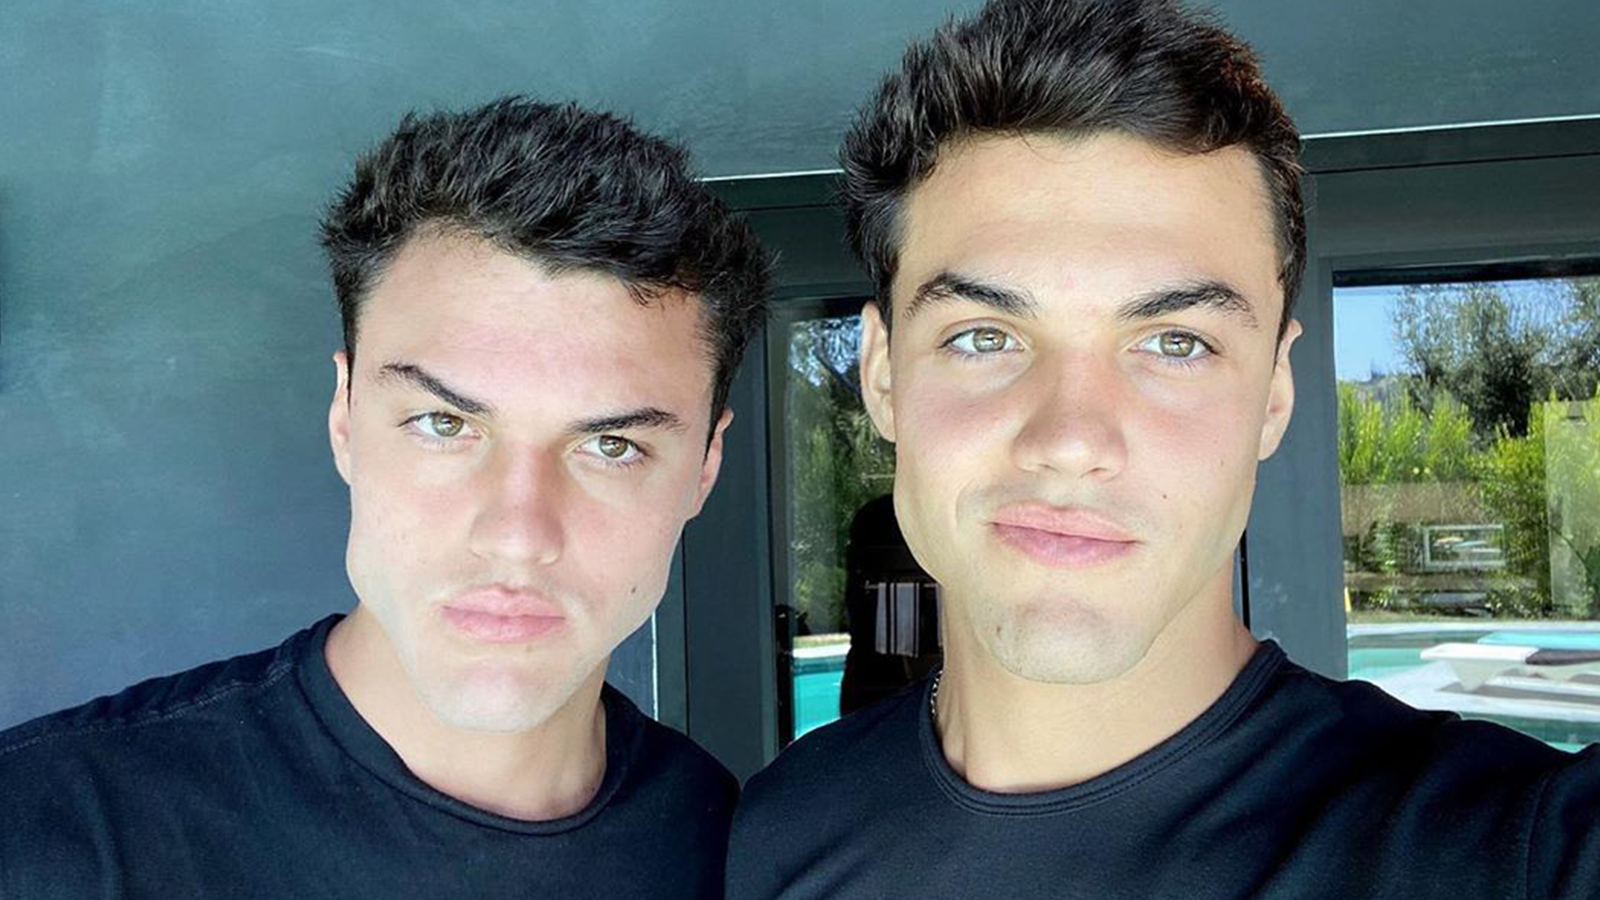 Dolan Twins Partner Fast-Food Chain To Debut Vegan Shake - Profits Donated To Earthling's Ed Animal Sanctuary